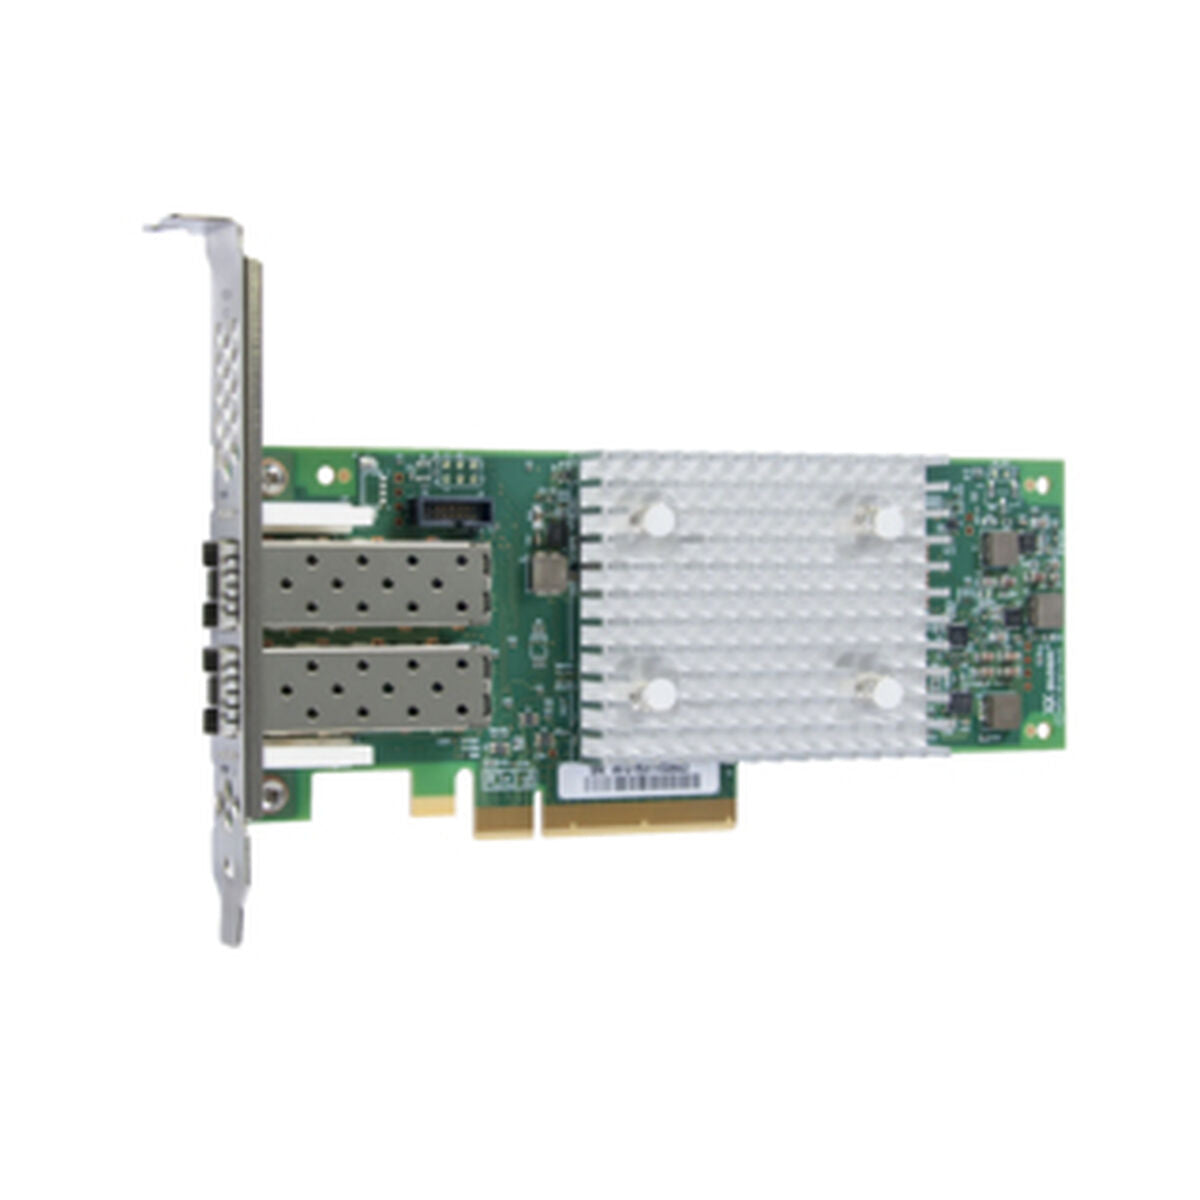 Network Card HPE P9D94A-2, HPE, Computing, Components, network-card-hpe-p9d94a-2, Brand_HPE, category-reference-2609, category-reference-2803, category-reference-2811, category-reference-t-19685, category-reference-t-19912, category-reference-t-21360, computers / components, Condition_NEW, Price_700 - 800, Teleworking, RiotNook